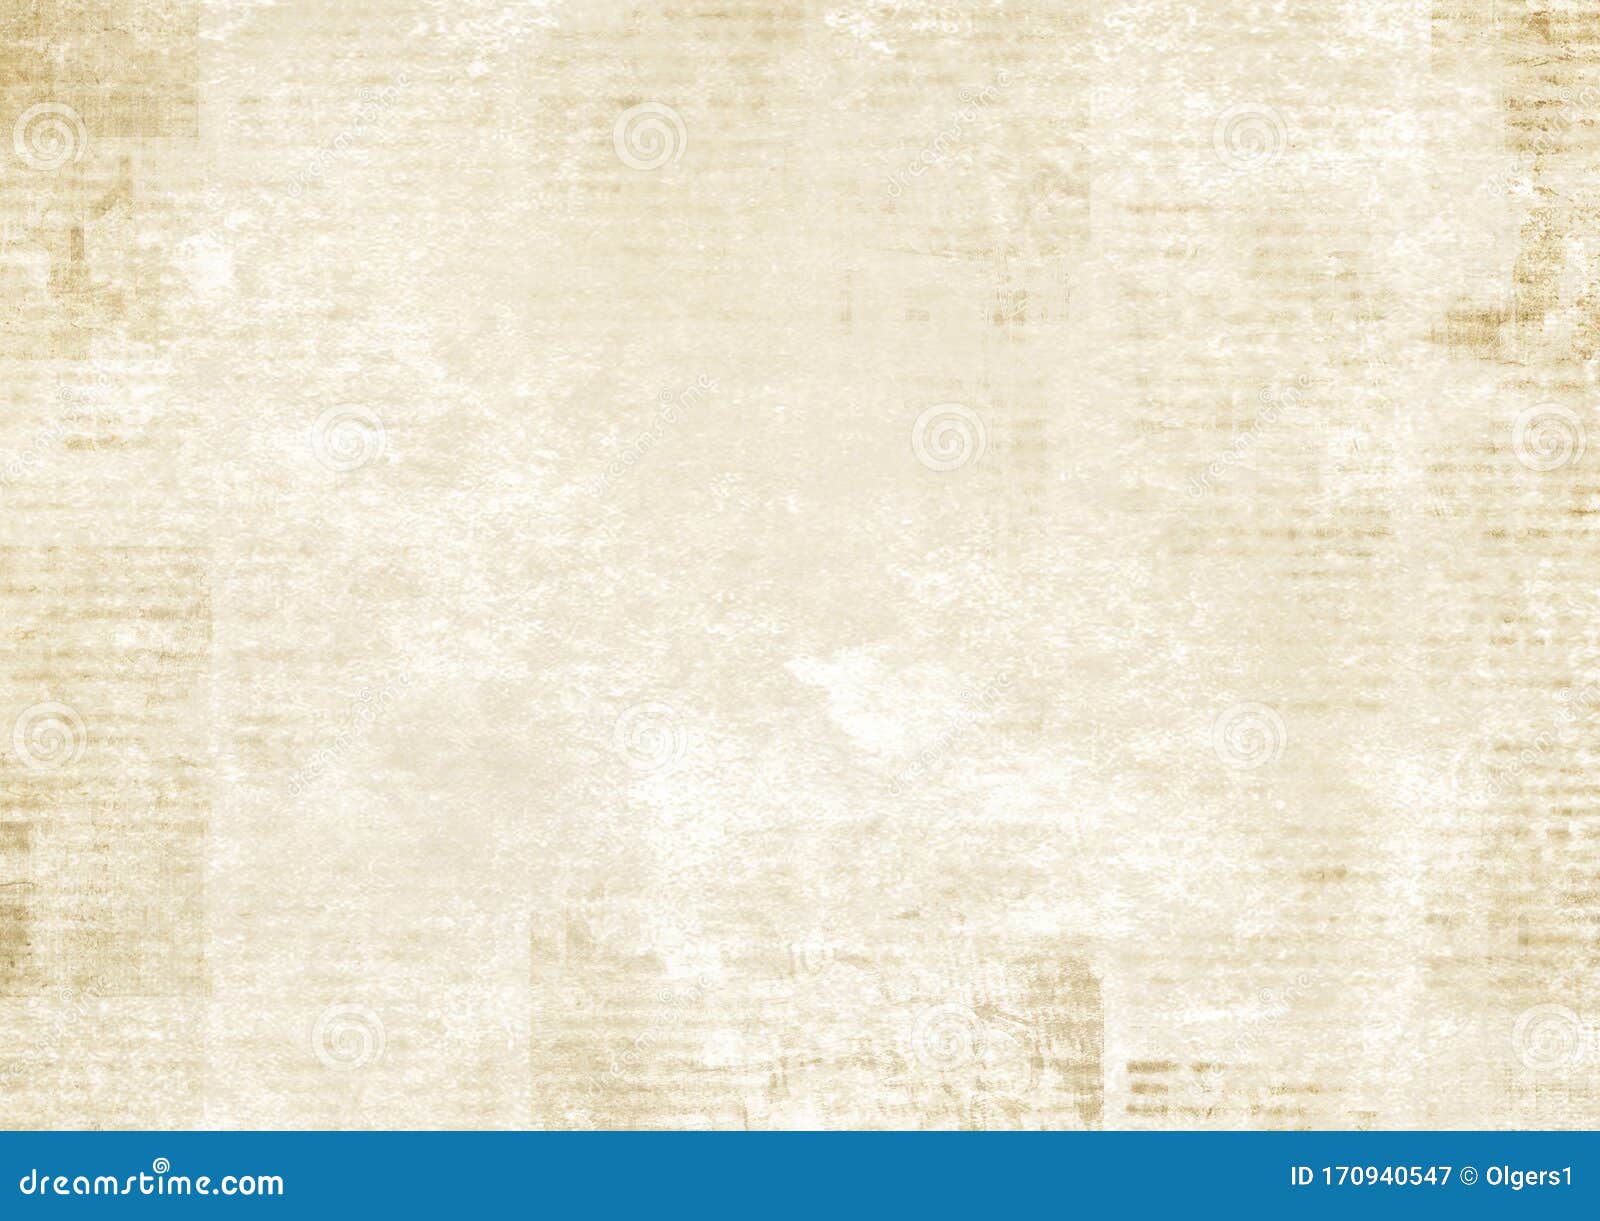 newspaper with old grunge vintage unreadable paper texture background